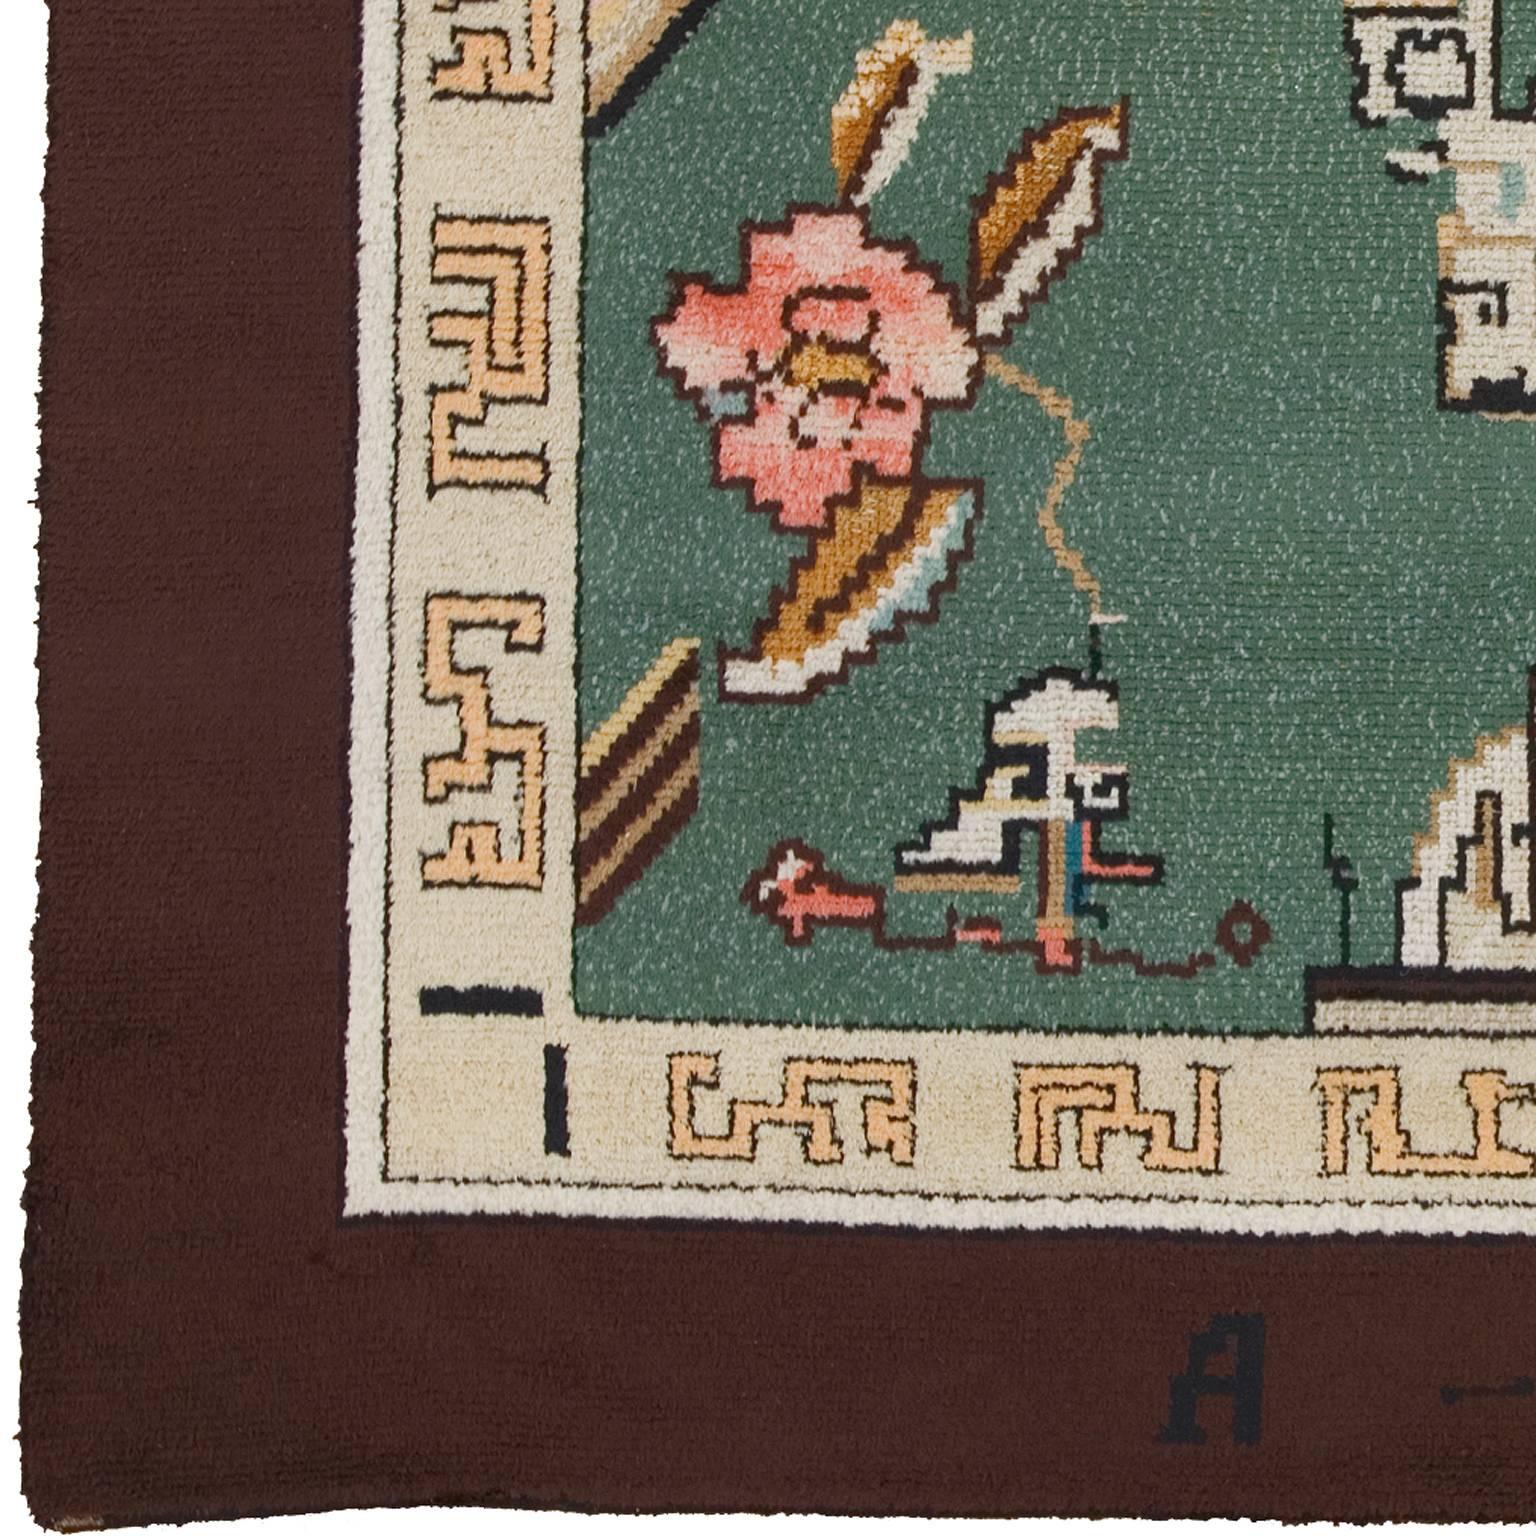 Early 20th century Swedish pile carpet. Initialed: Fo SY 1927 (Einar Forseth).
Woven by Örve Hälsinglands Hemslöjdsförening.
Inscriptions: Three anchors, A-I-B, E 27/10 T.
This carpet was a gift from AB Iggesunds Bruk to Erns Trygger